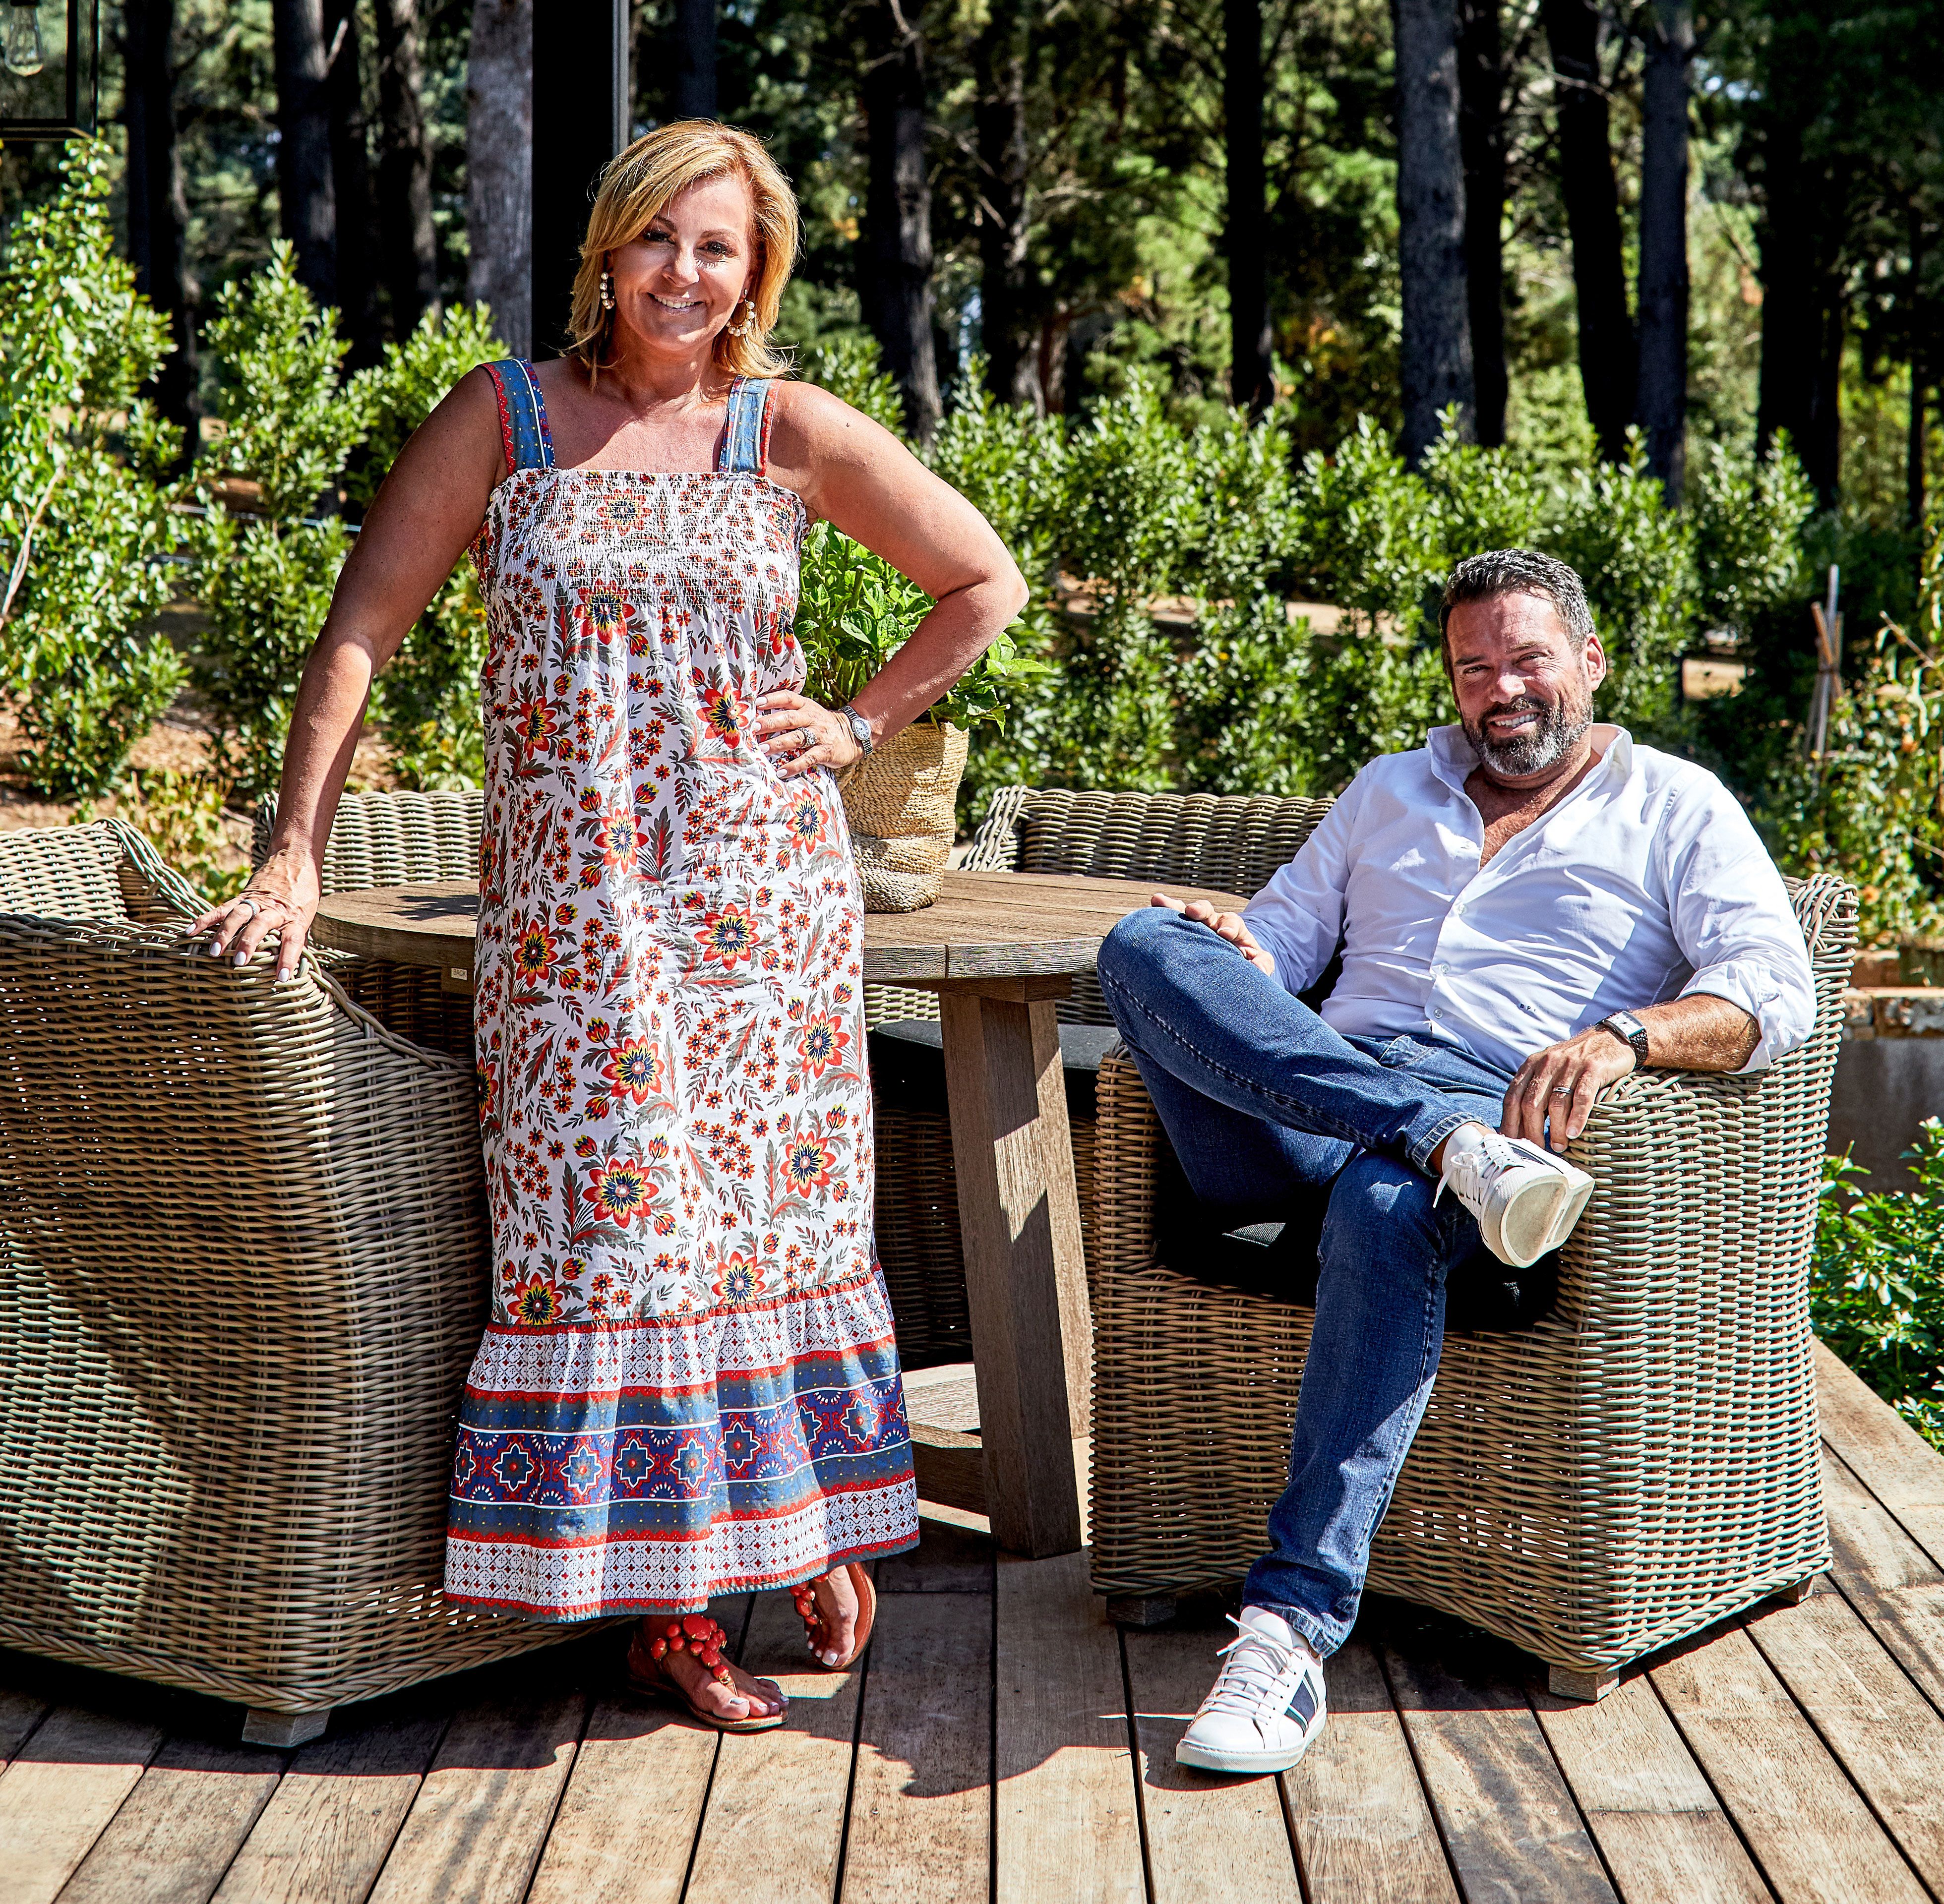 Getting away from it all: Inside Chyka and Bruce Keebaugh's chic weekender